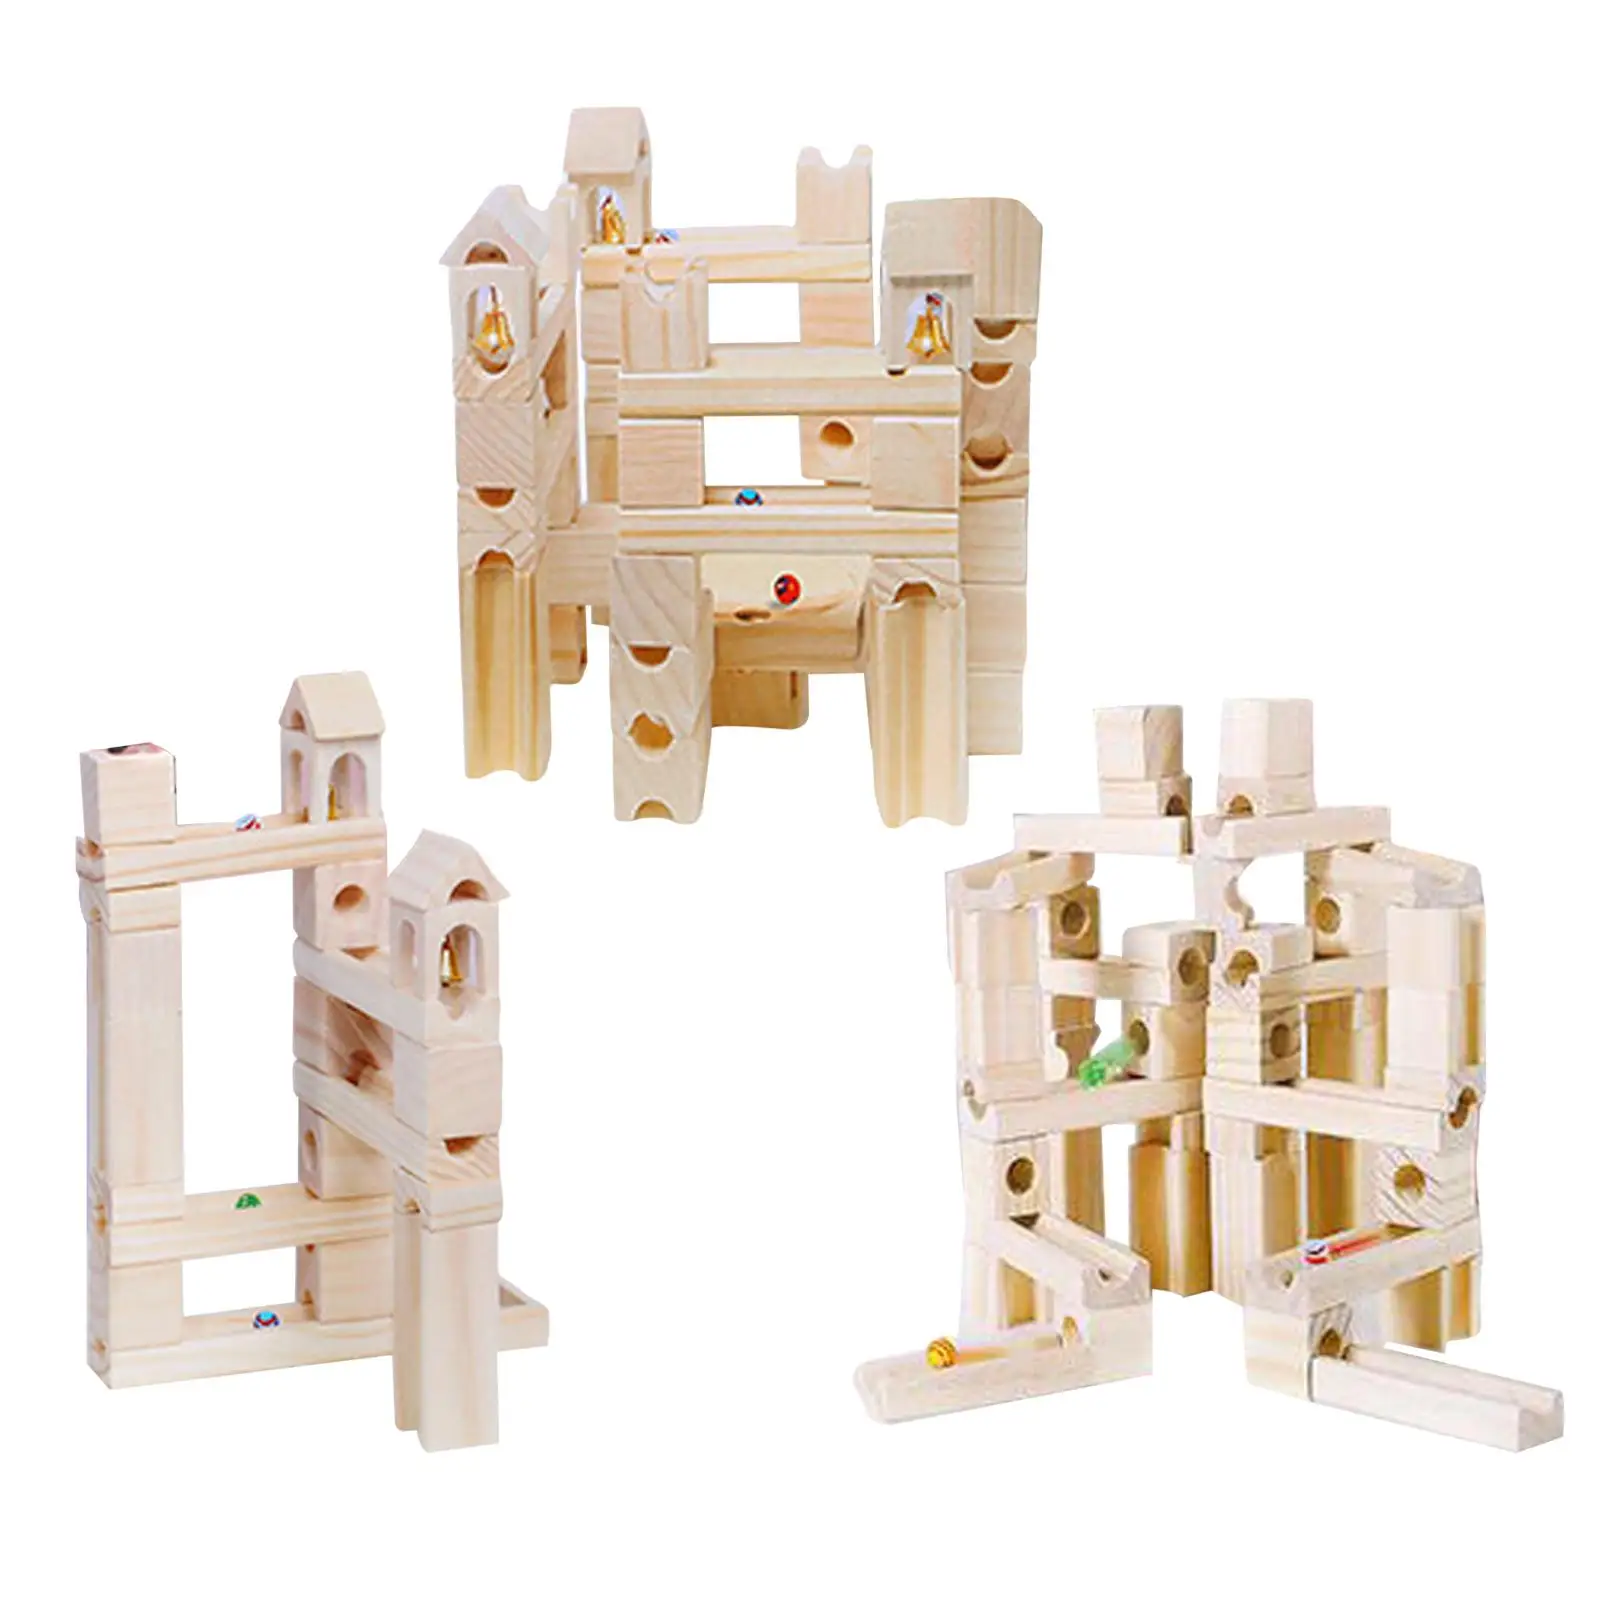 Wood Marble Run Building Blocks Set Early Educational for Birthday Gift Kids